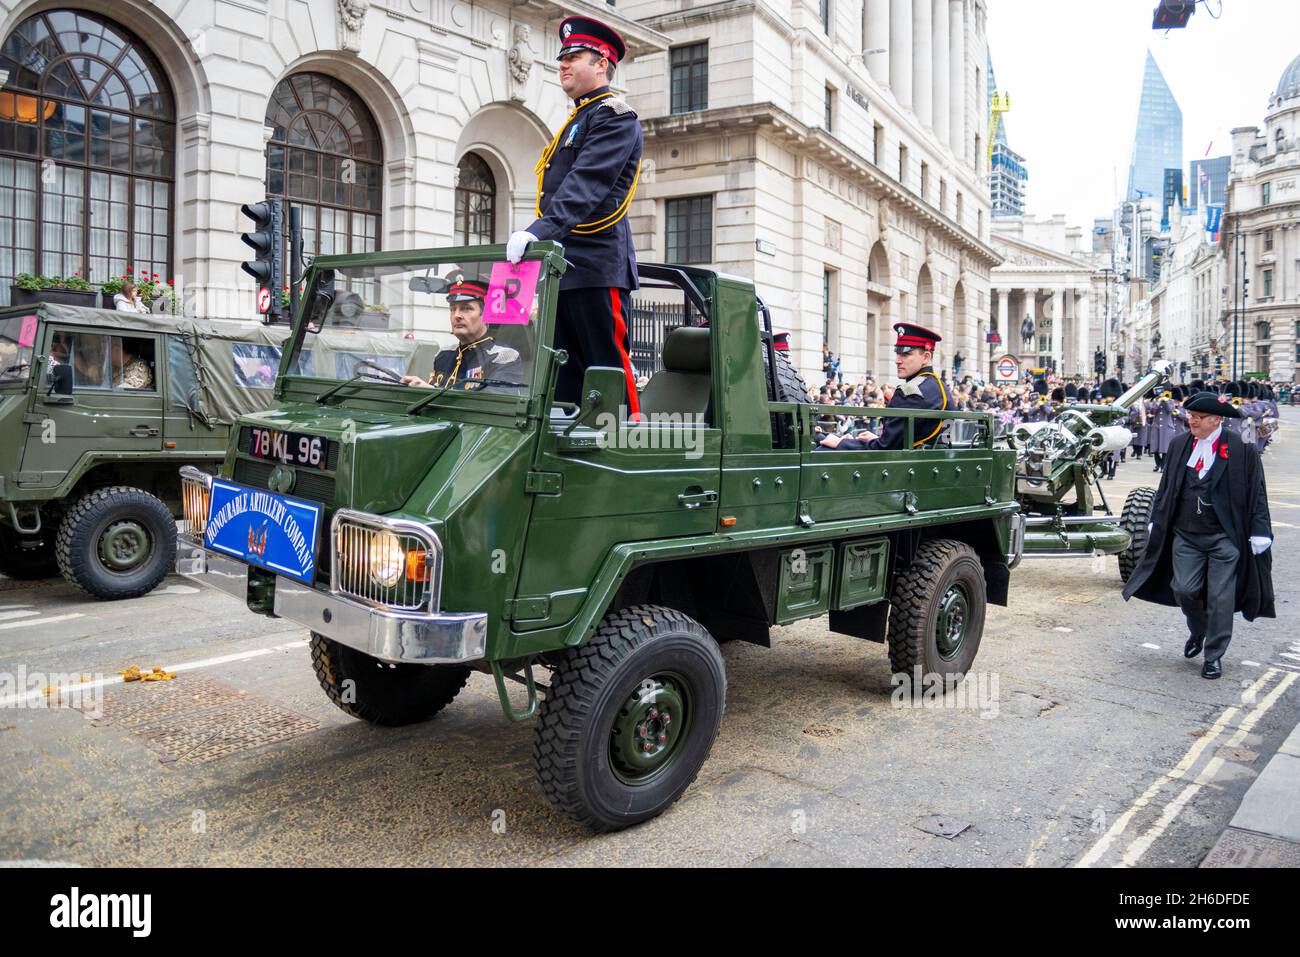 The Honourable Artillery Company vehicles at the Lord Mayor's Show, Parade, procession passing along Poultry, near Mansion House, London, UK Stock Photo